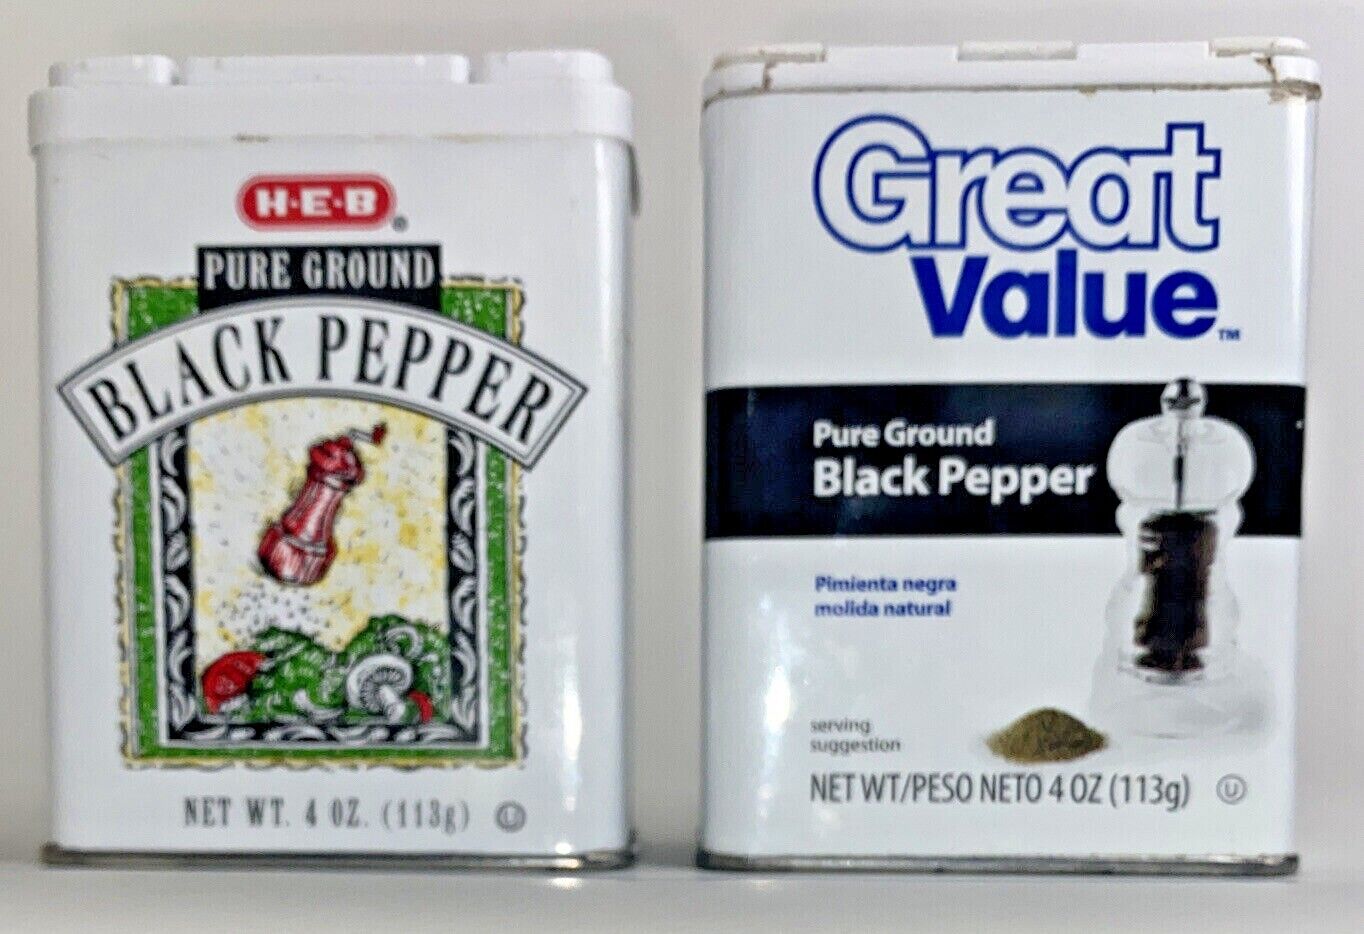 Set of 2 Pure Ground Black Pepper 4 oz Tins Cans HEB 2020 & Great Value 2014